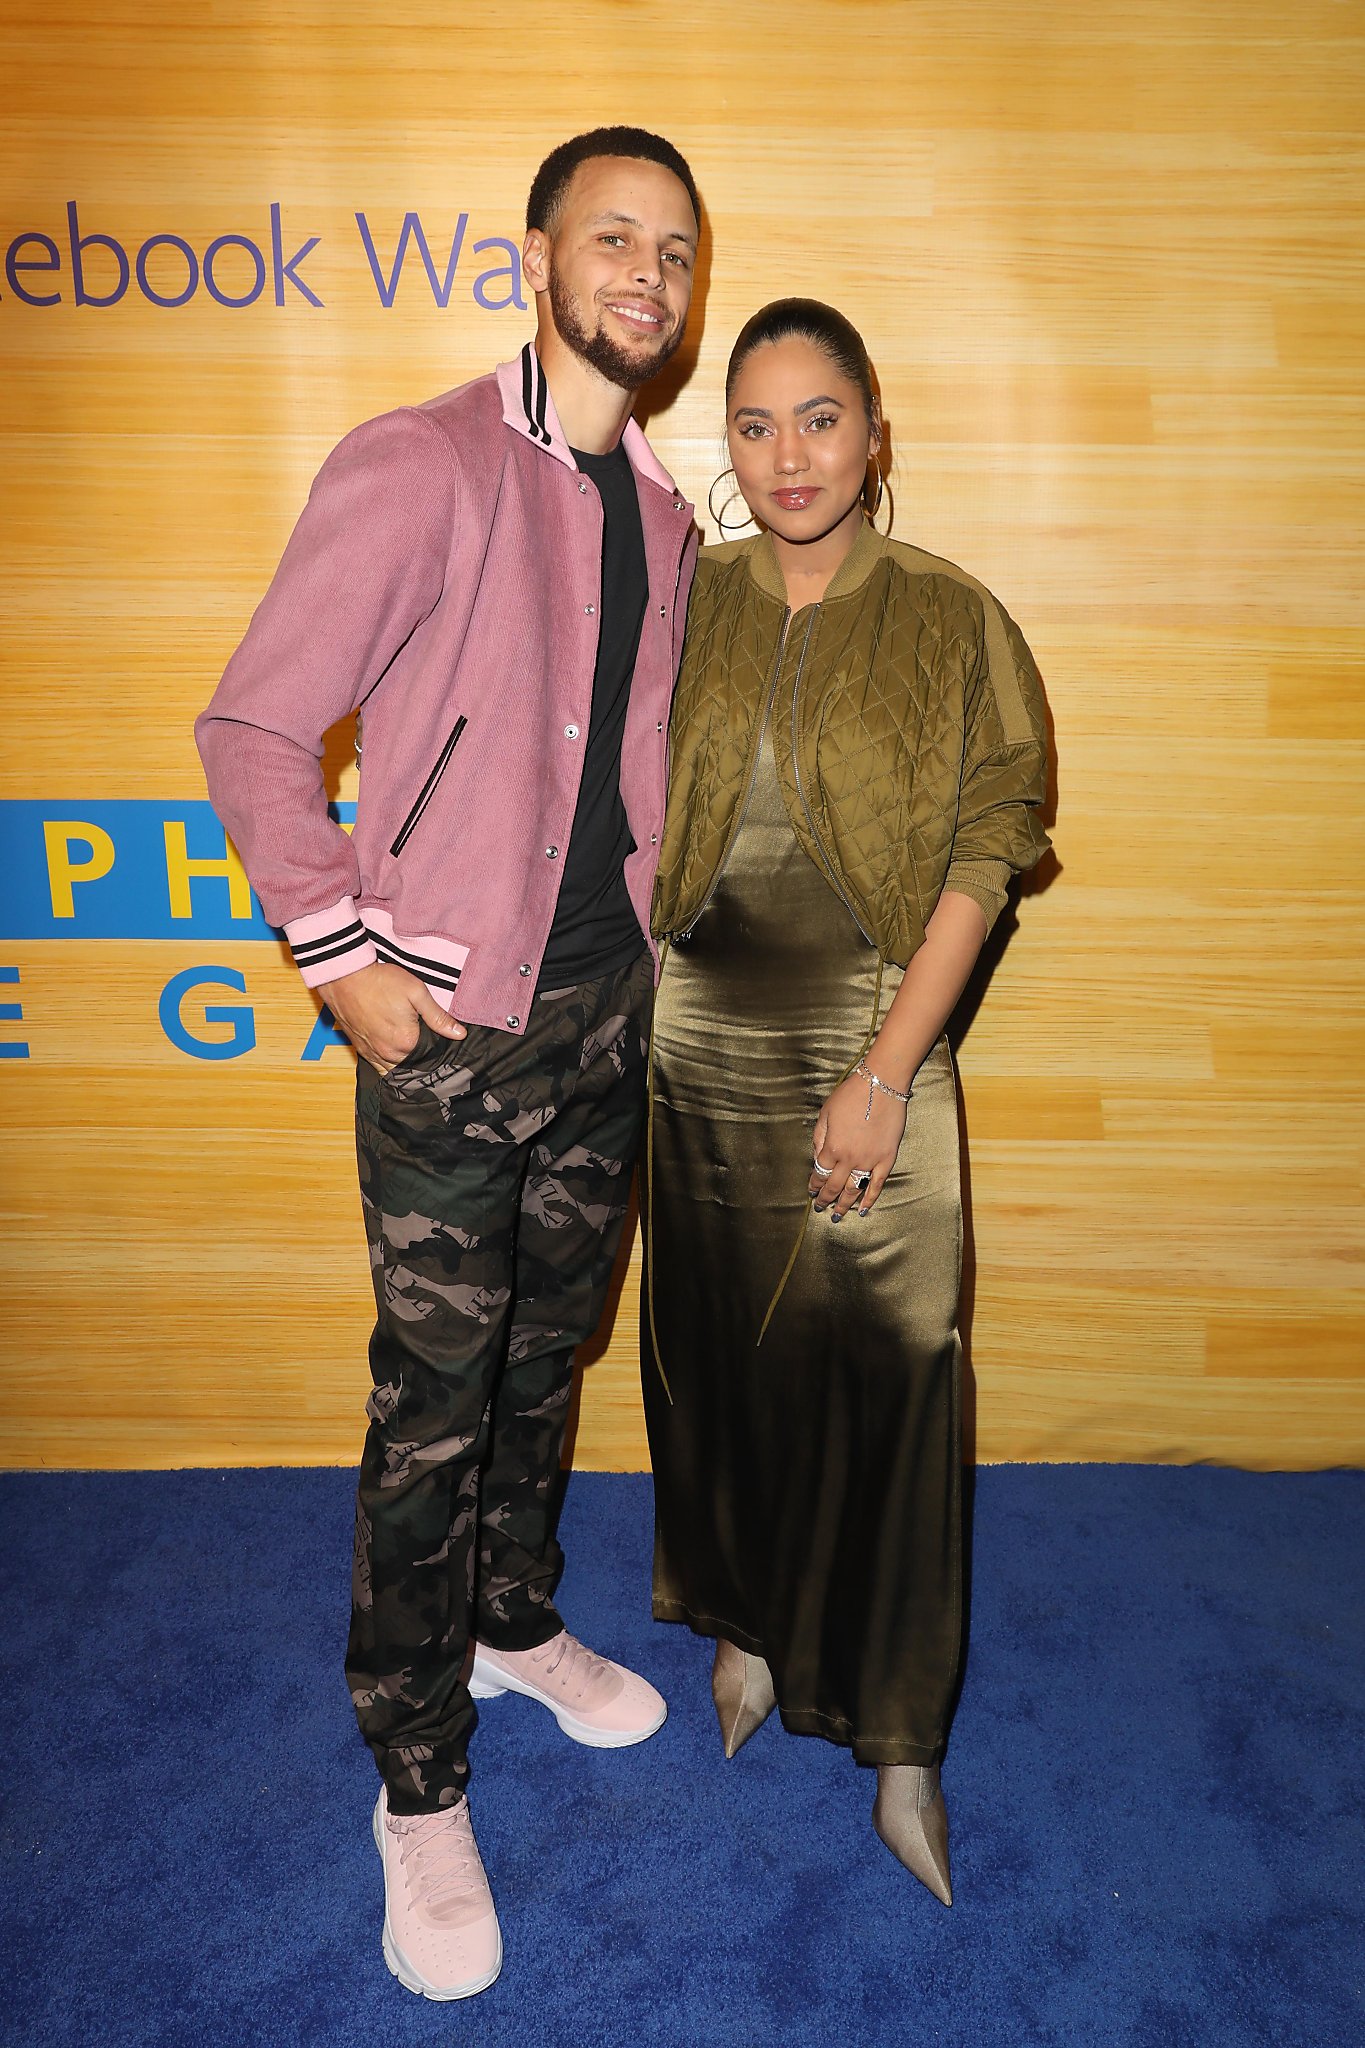 Steph Curry's Wife Ayesha Curry: How They Met, Married, Kids - Parade